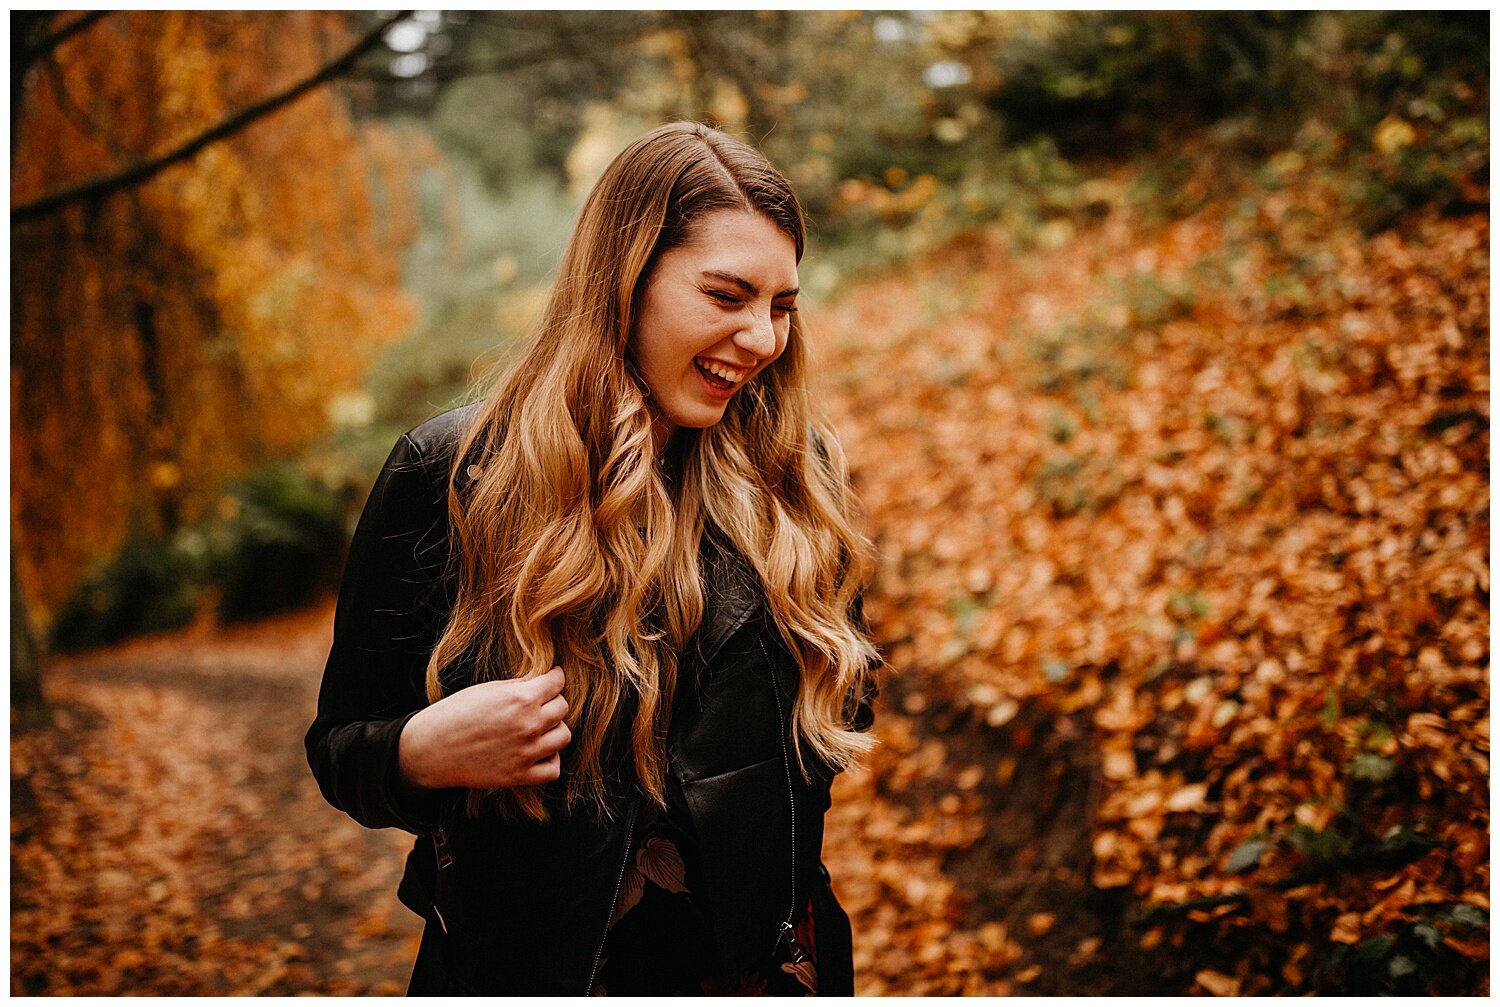  Girl laughing while surrounded by orange autumn leaves. 